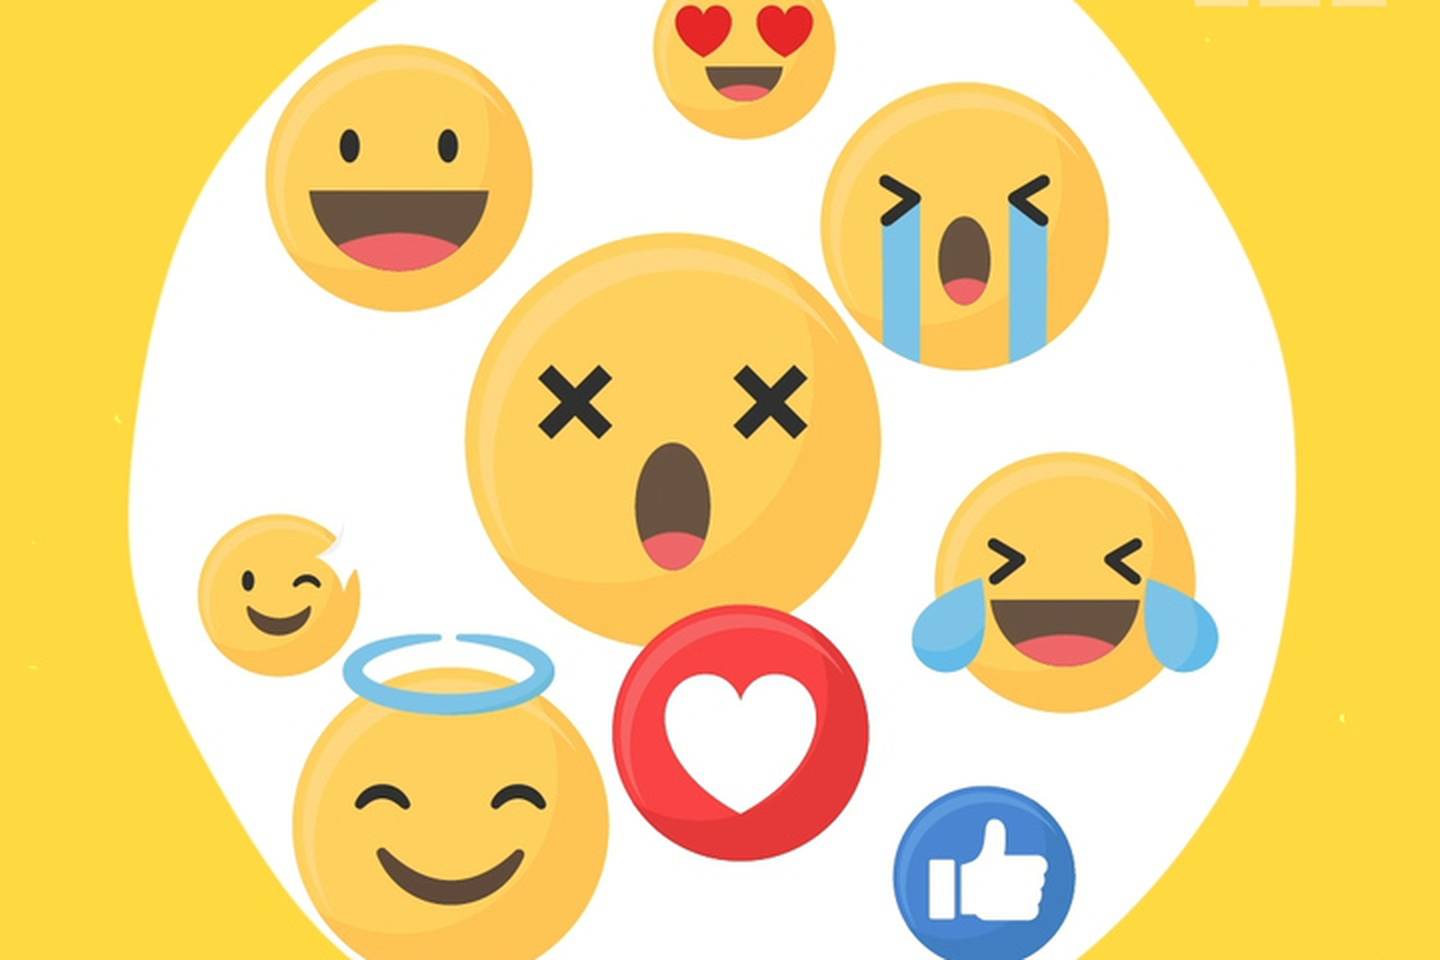 What Does the 8-ball Emoji Mean on Facebook?